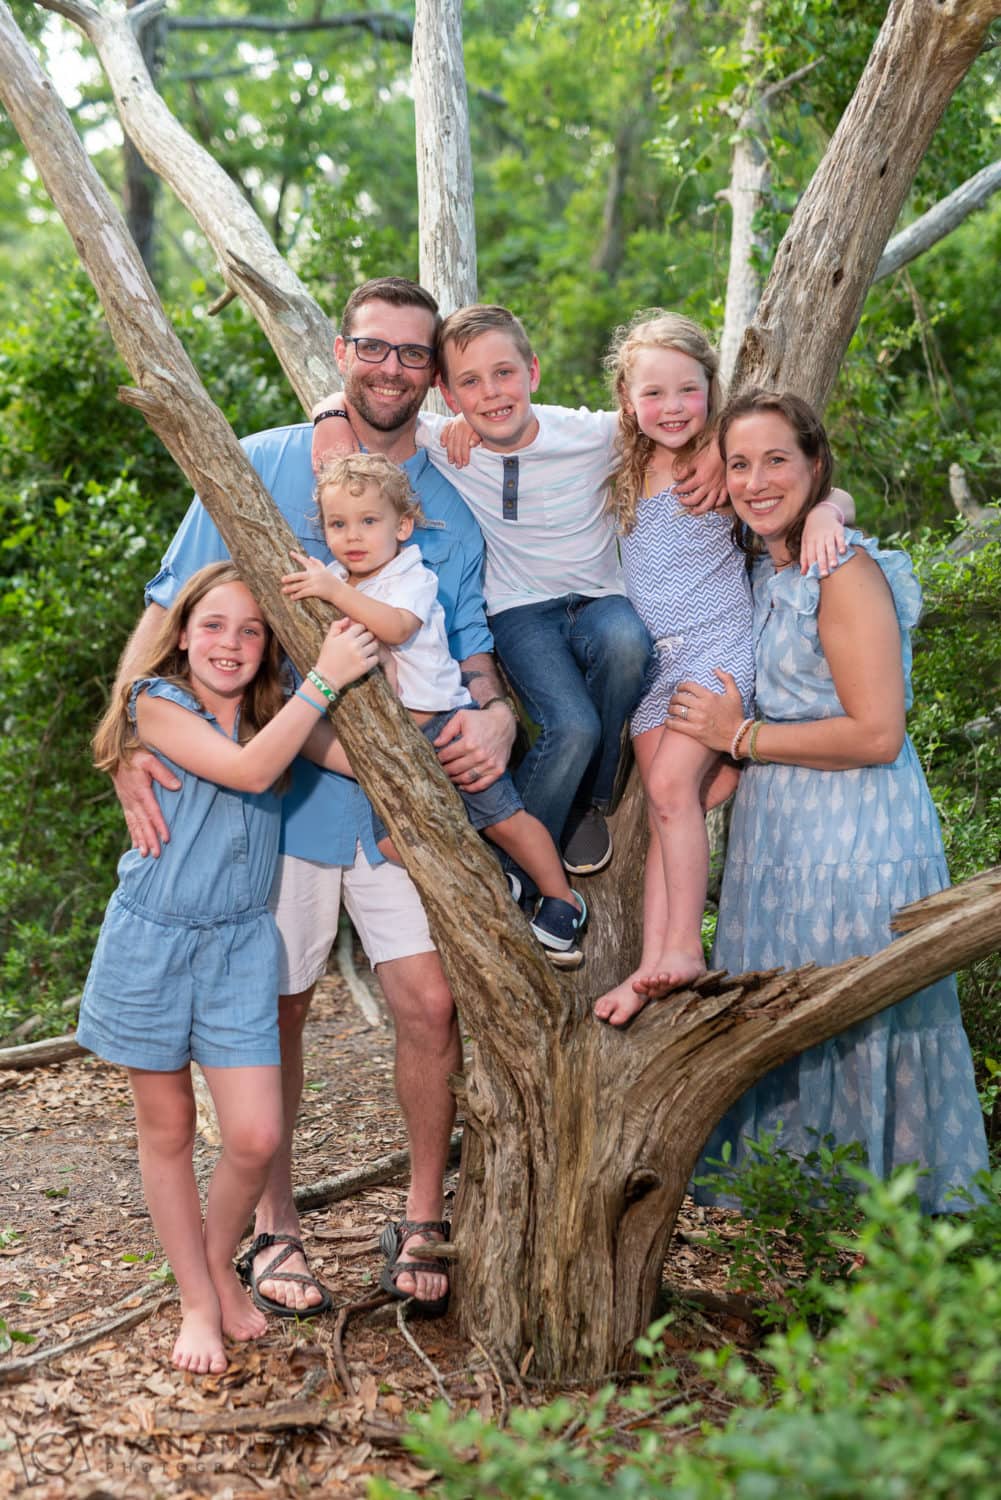 Family photos by the old oak trees - Myrtle Beach State Park